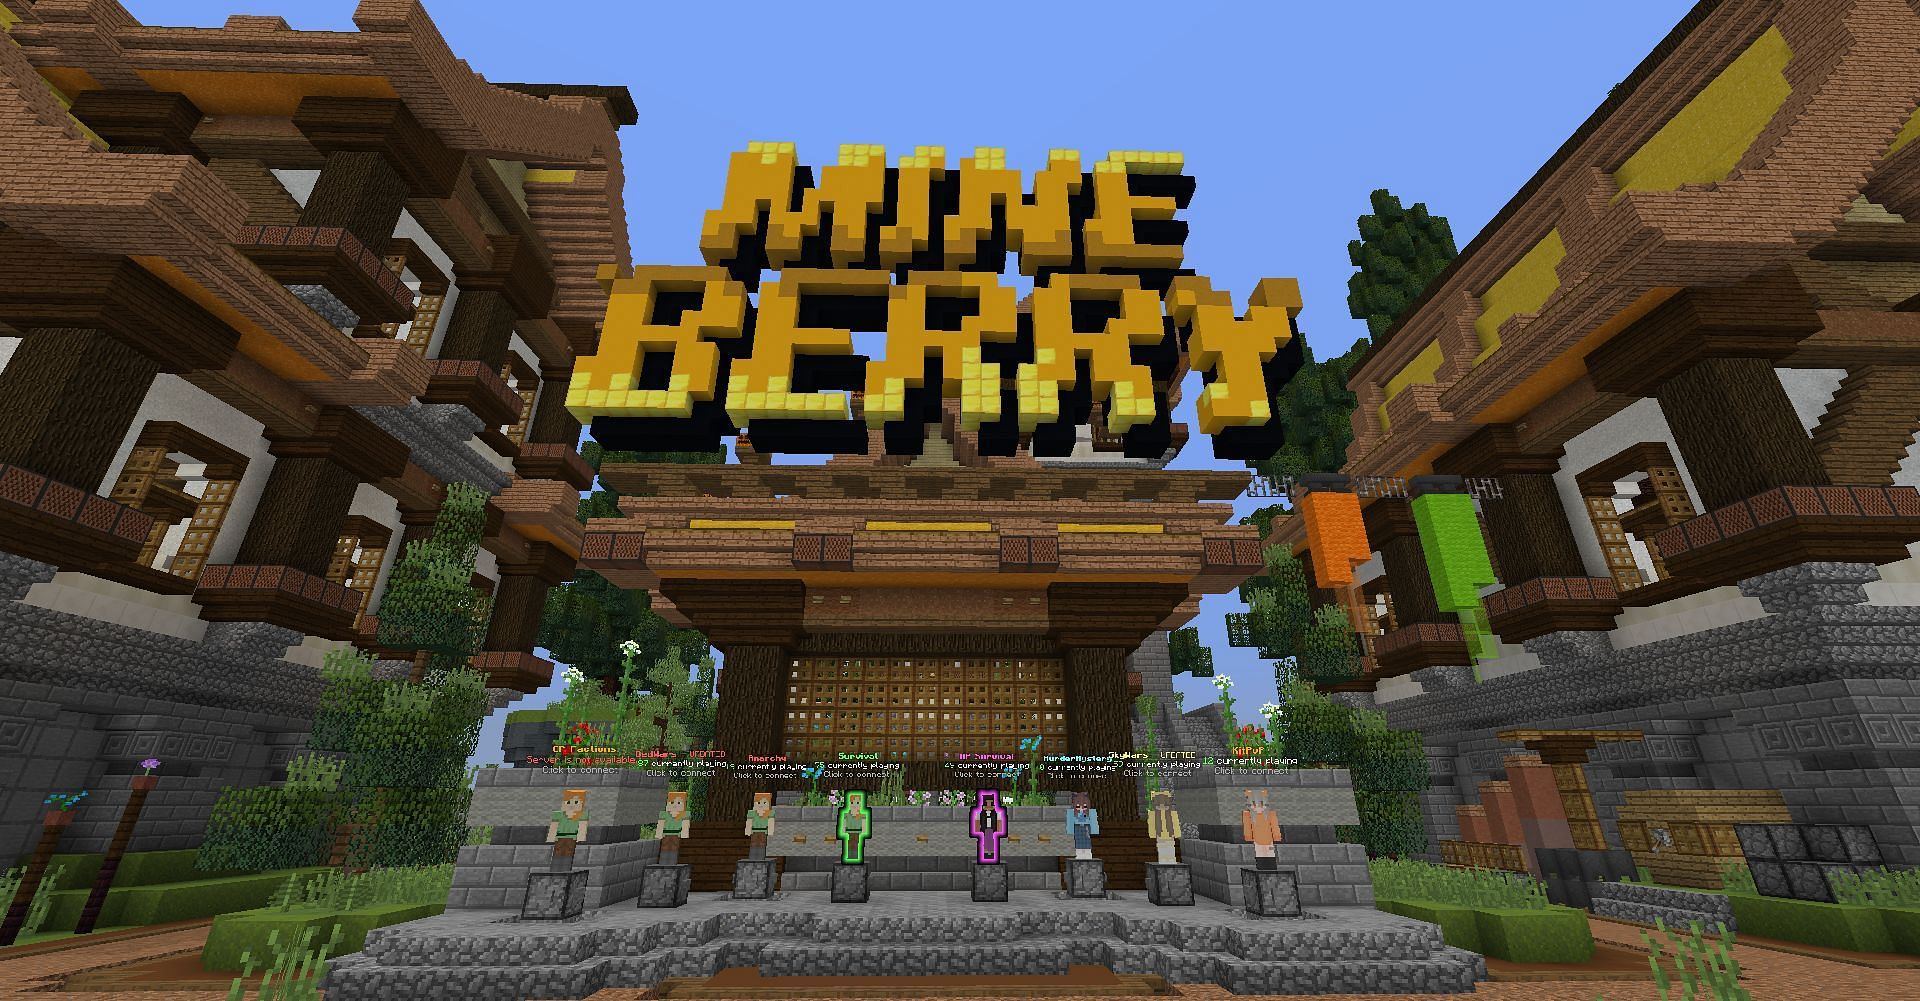 MineBerry is a great server that allows play on version 1.12 (Image via Mojang)